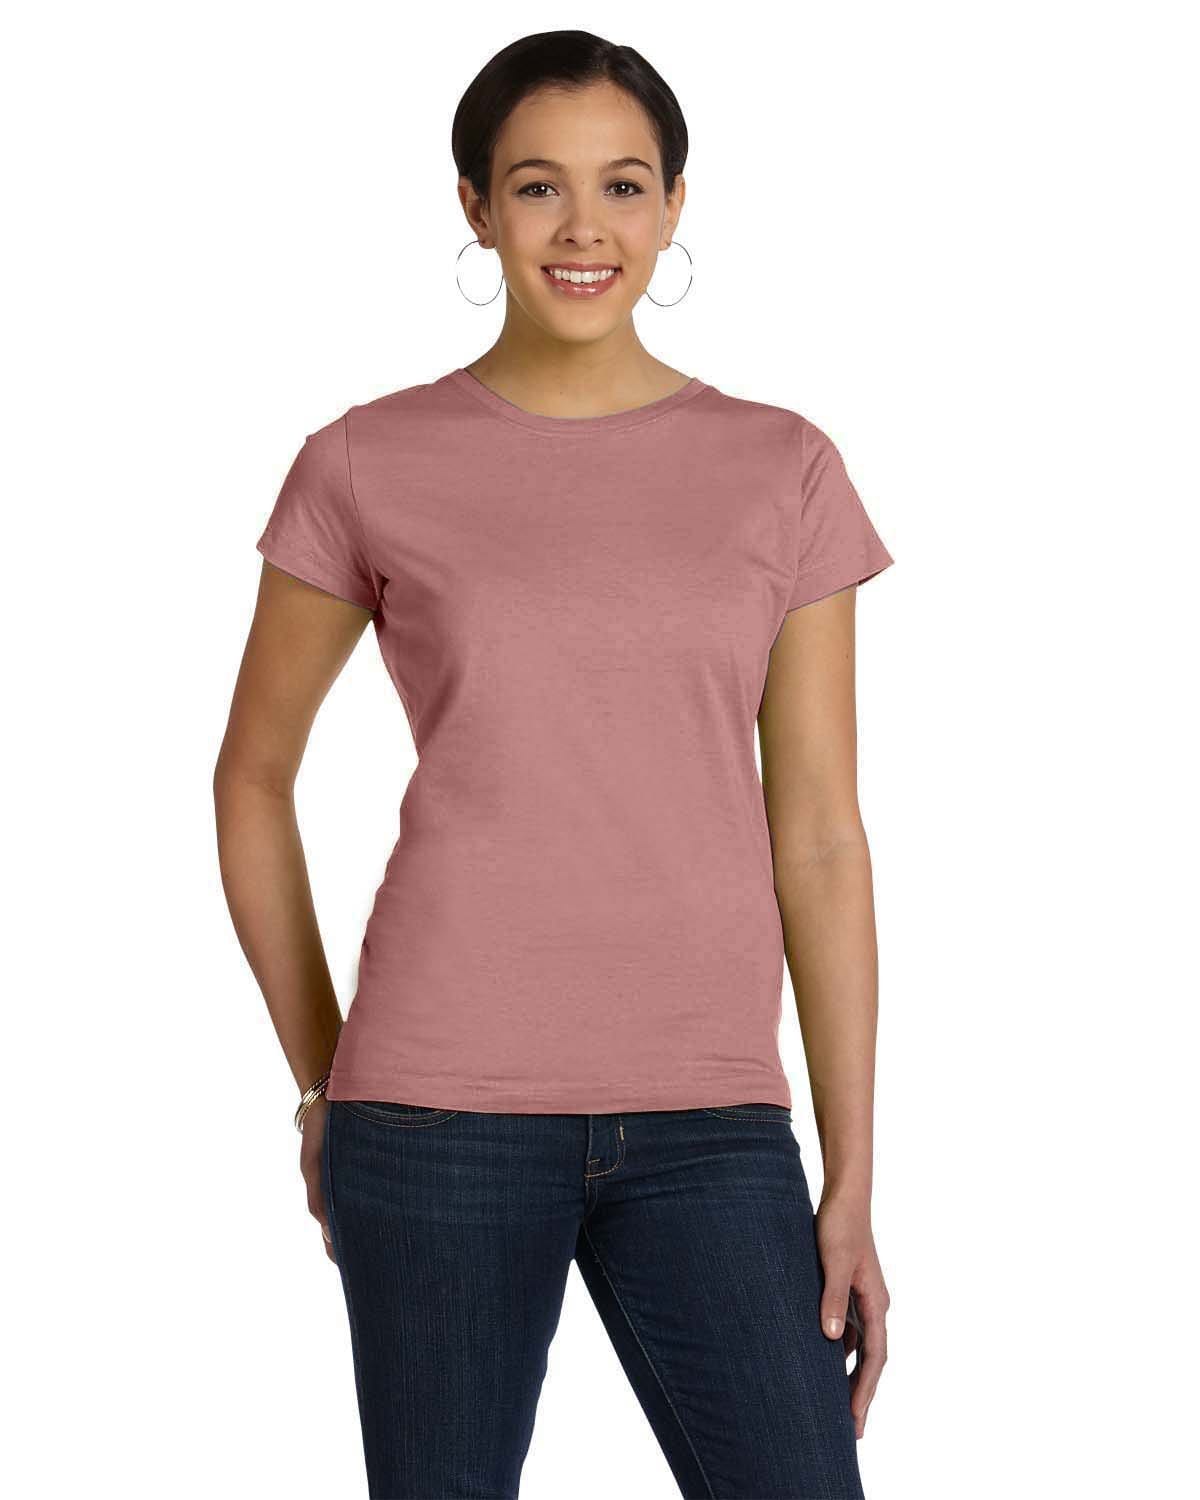 LAT 3516: Ladies' Fine Jersey T-Shirt, Extended Colors